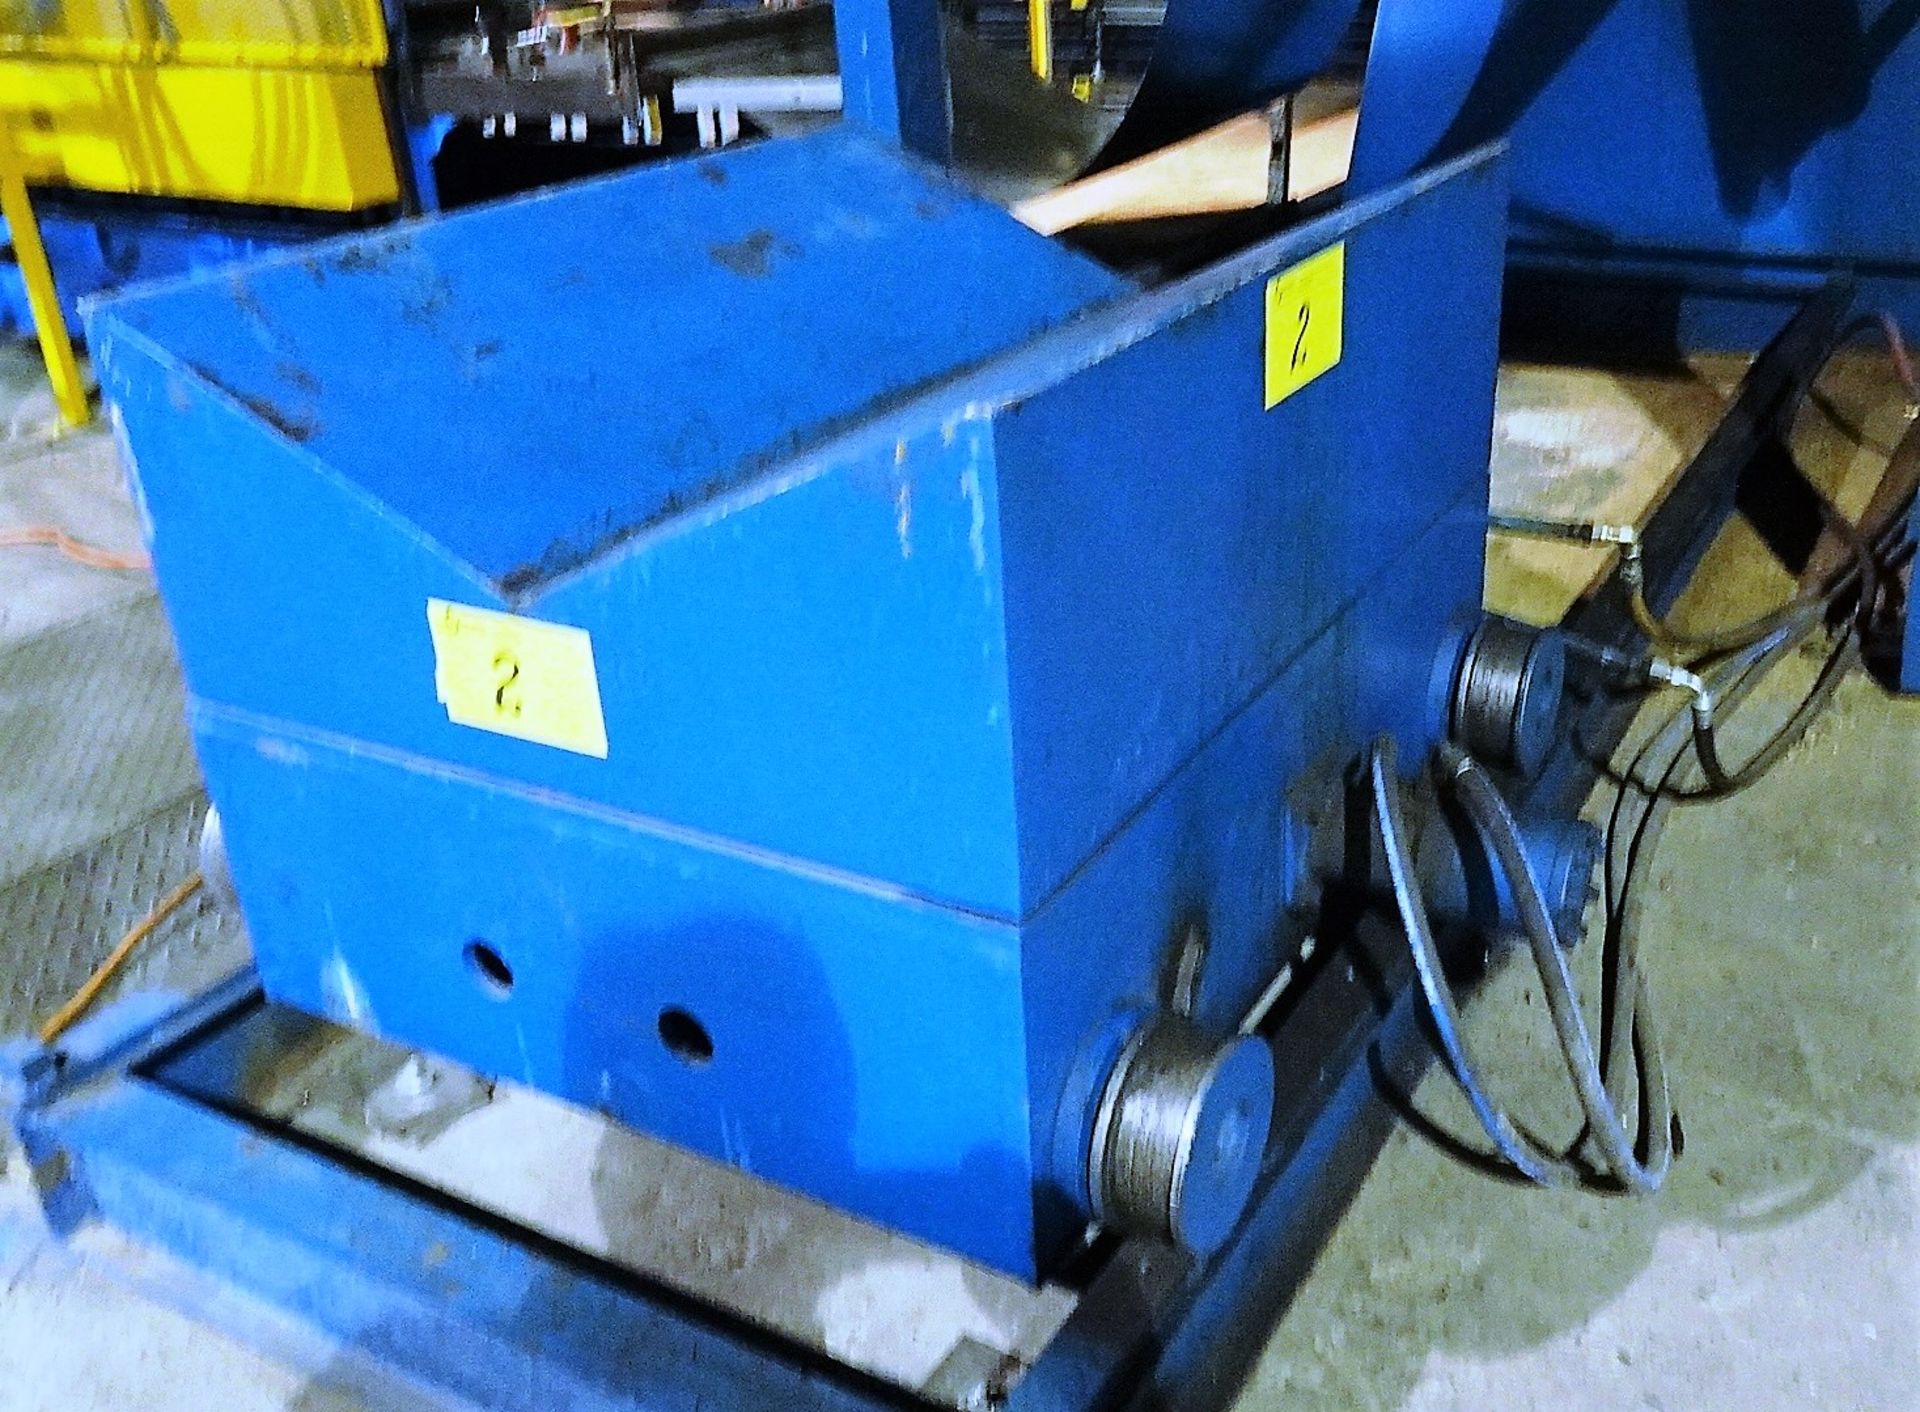 Allstar Approx. 5 Ton Cap Uncoiler, 48" Coil Capacity, Powered with Electric Motor c/w Coil Carriage - Image 10 of 12